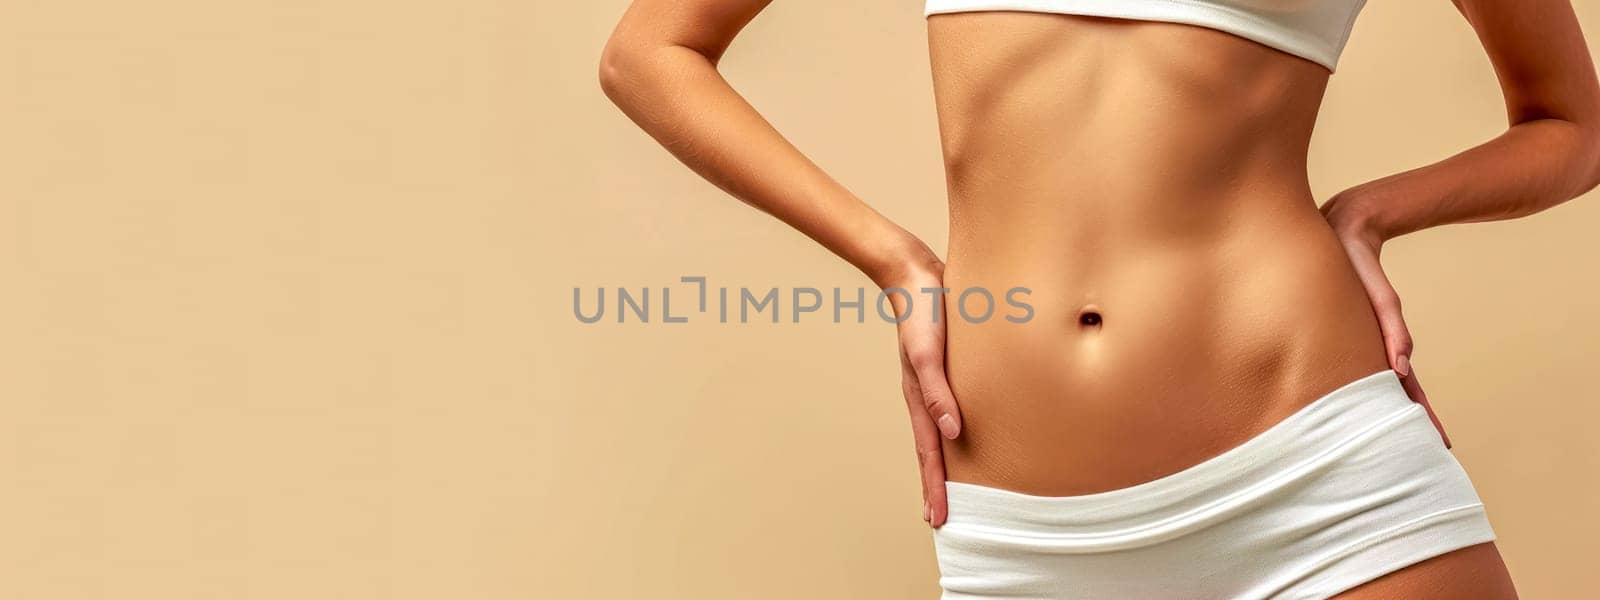 woman's toned midsection against a beige background, wearing a white undergarment or sportswear, exemplifying fitness, health, and body care by Edophoto